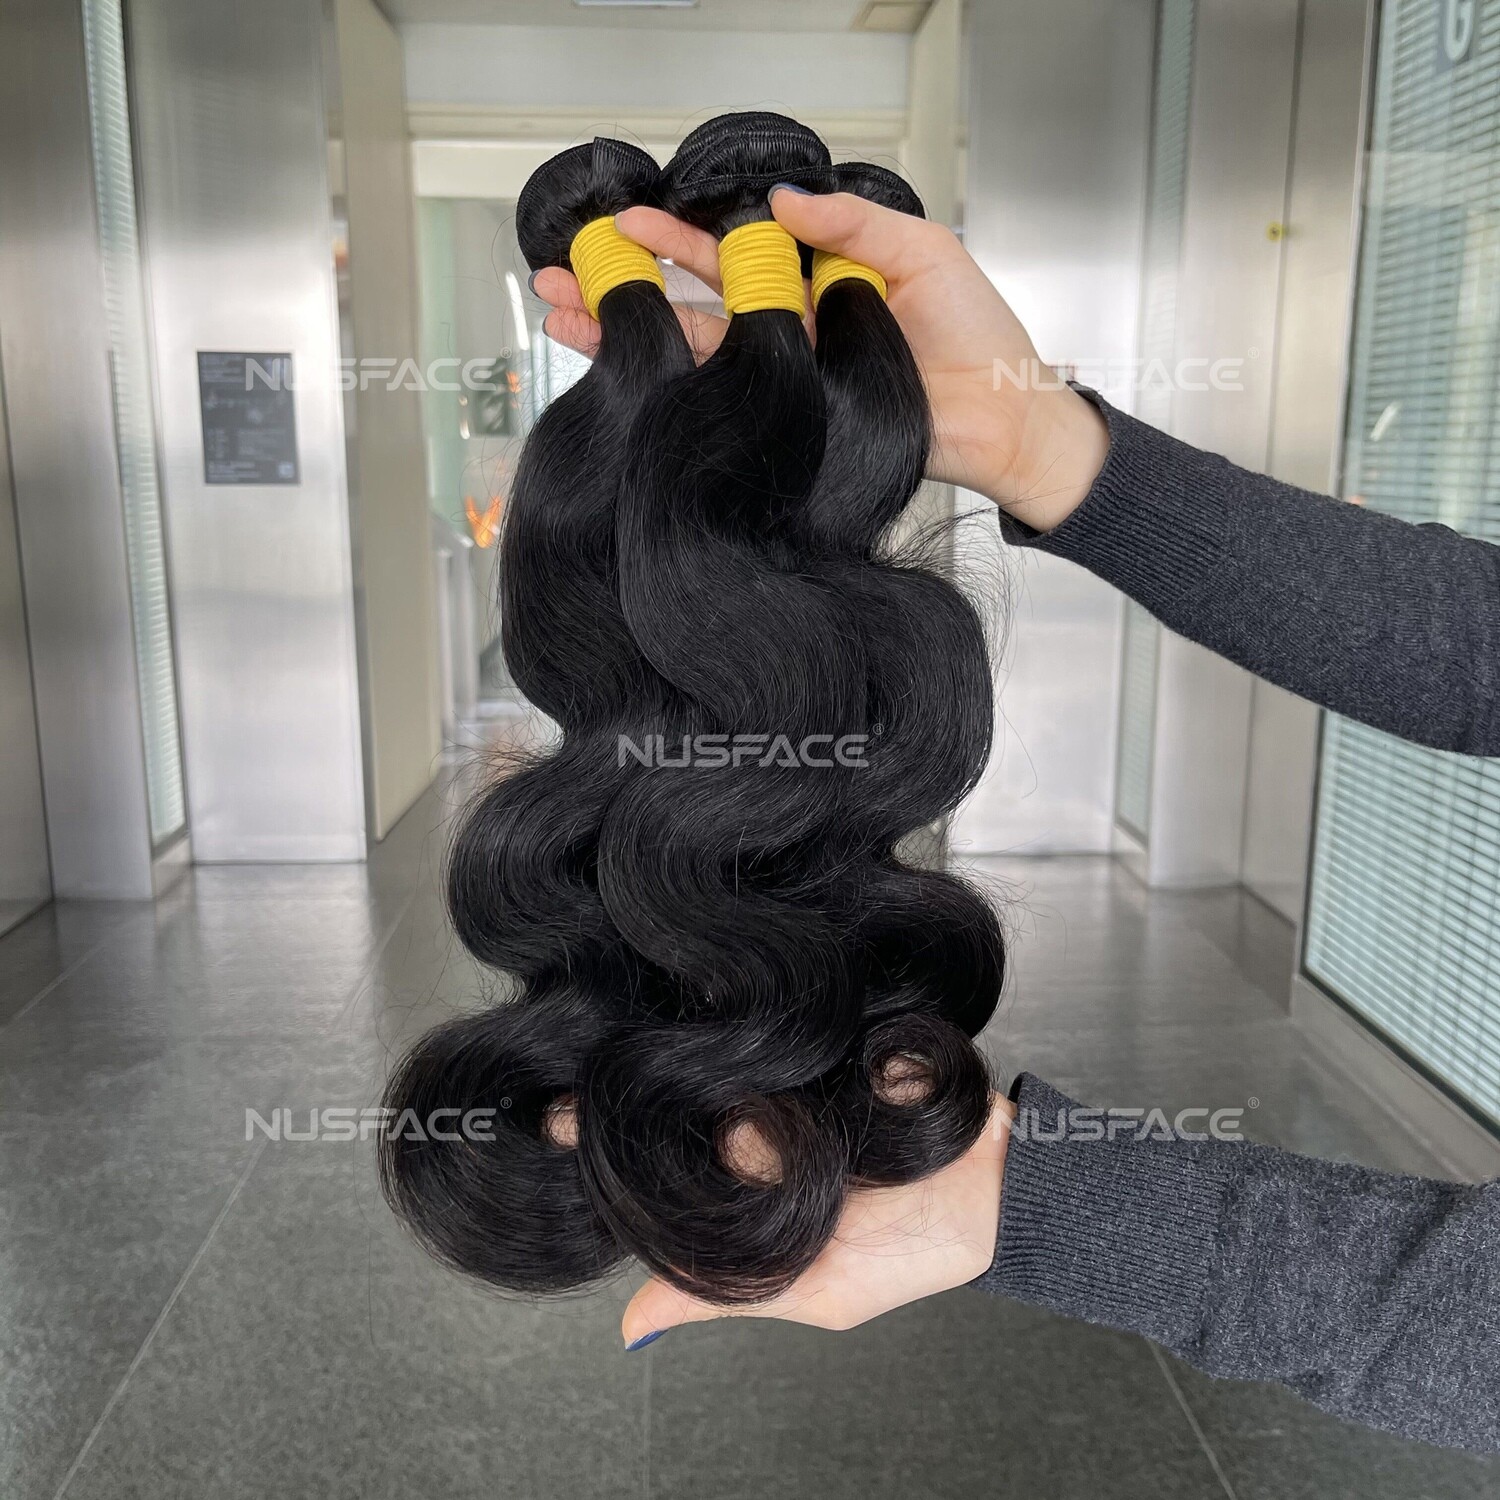 Natural hair extensions, bundles of raw Brazilian virgin human hair, 10 inches to 28 inches in length, priced between $45 and $180 a bundle.